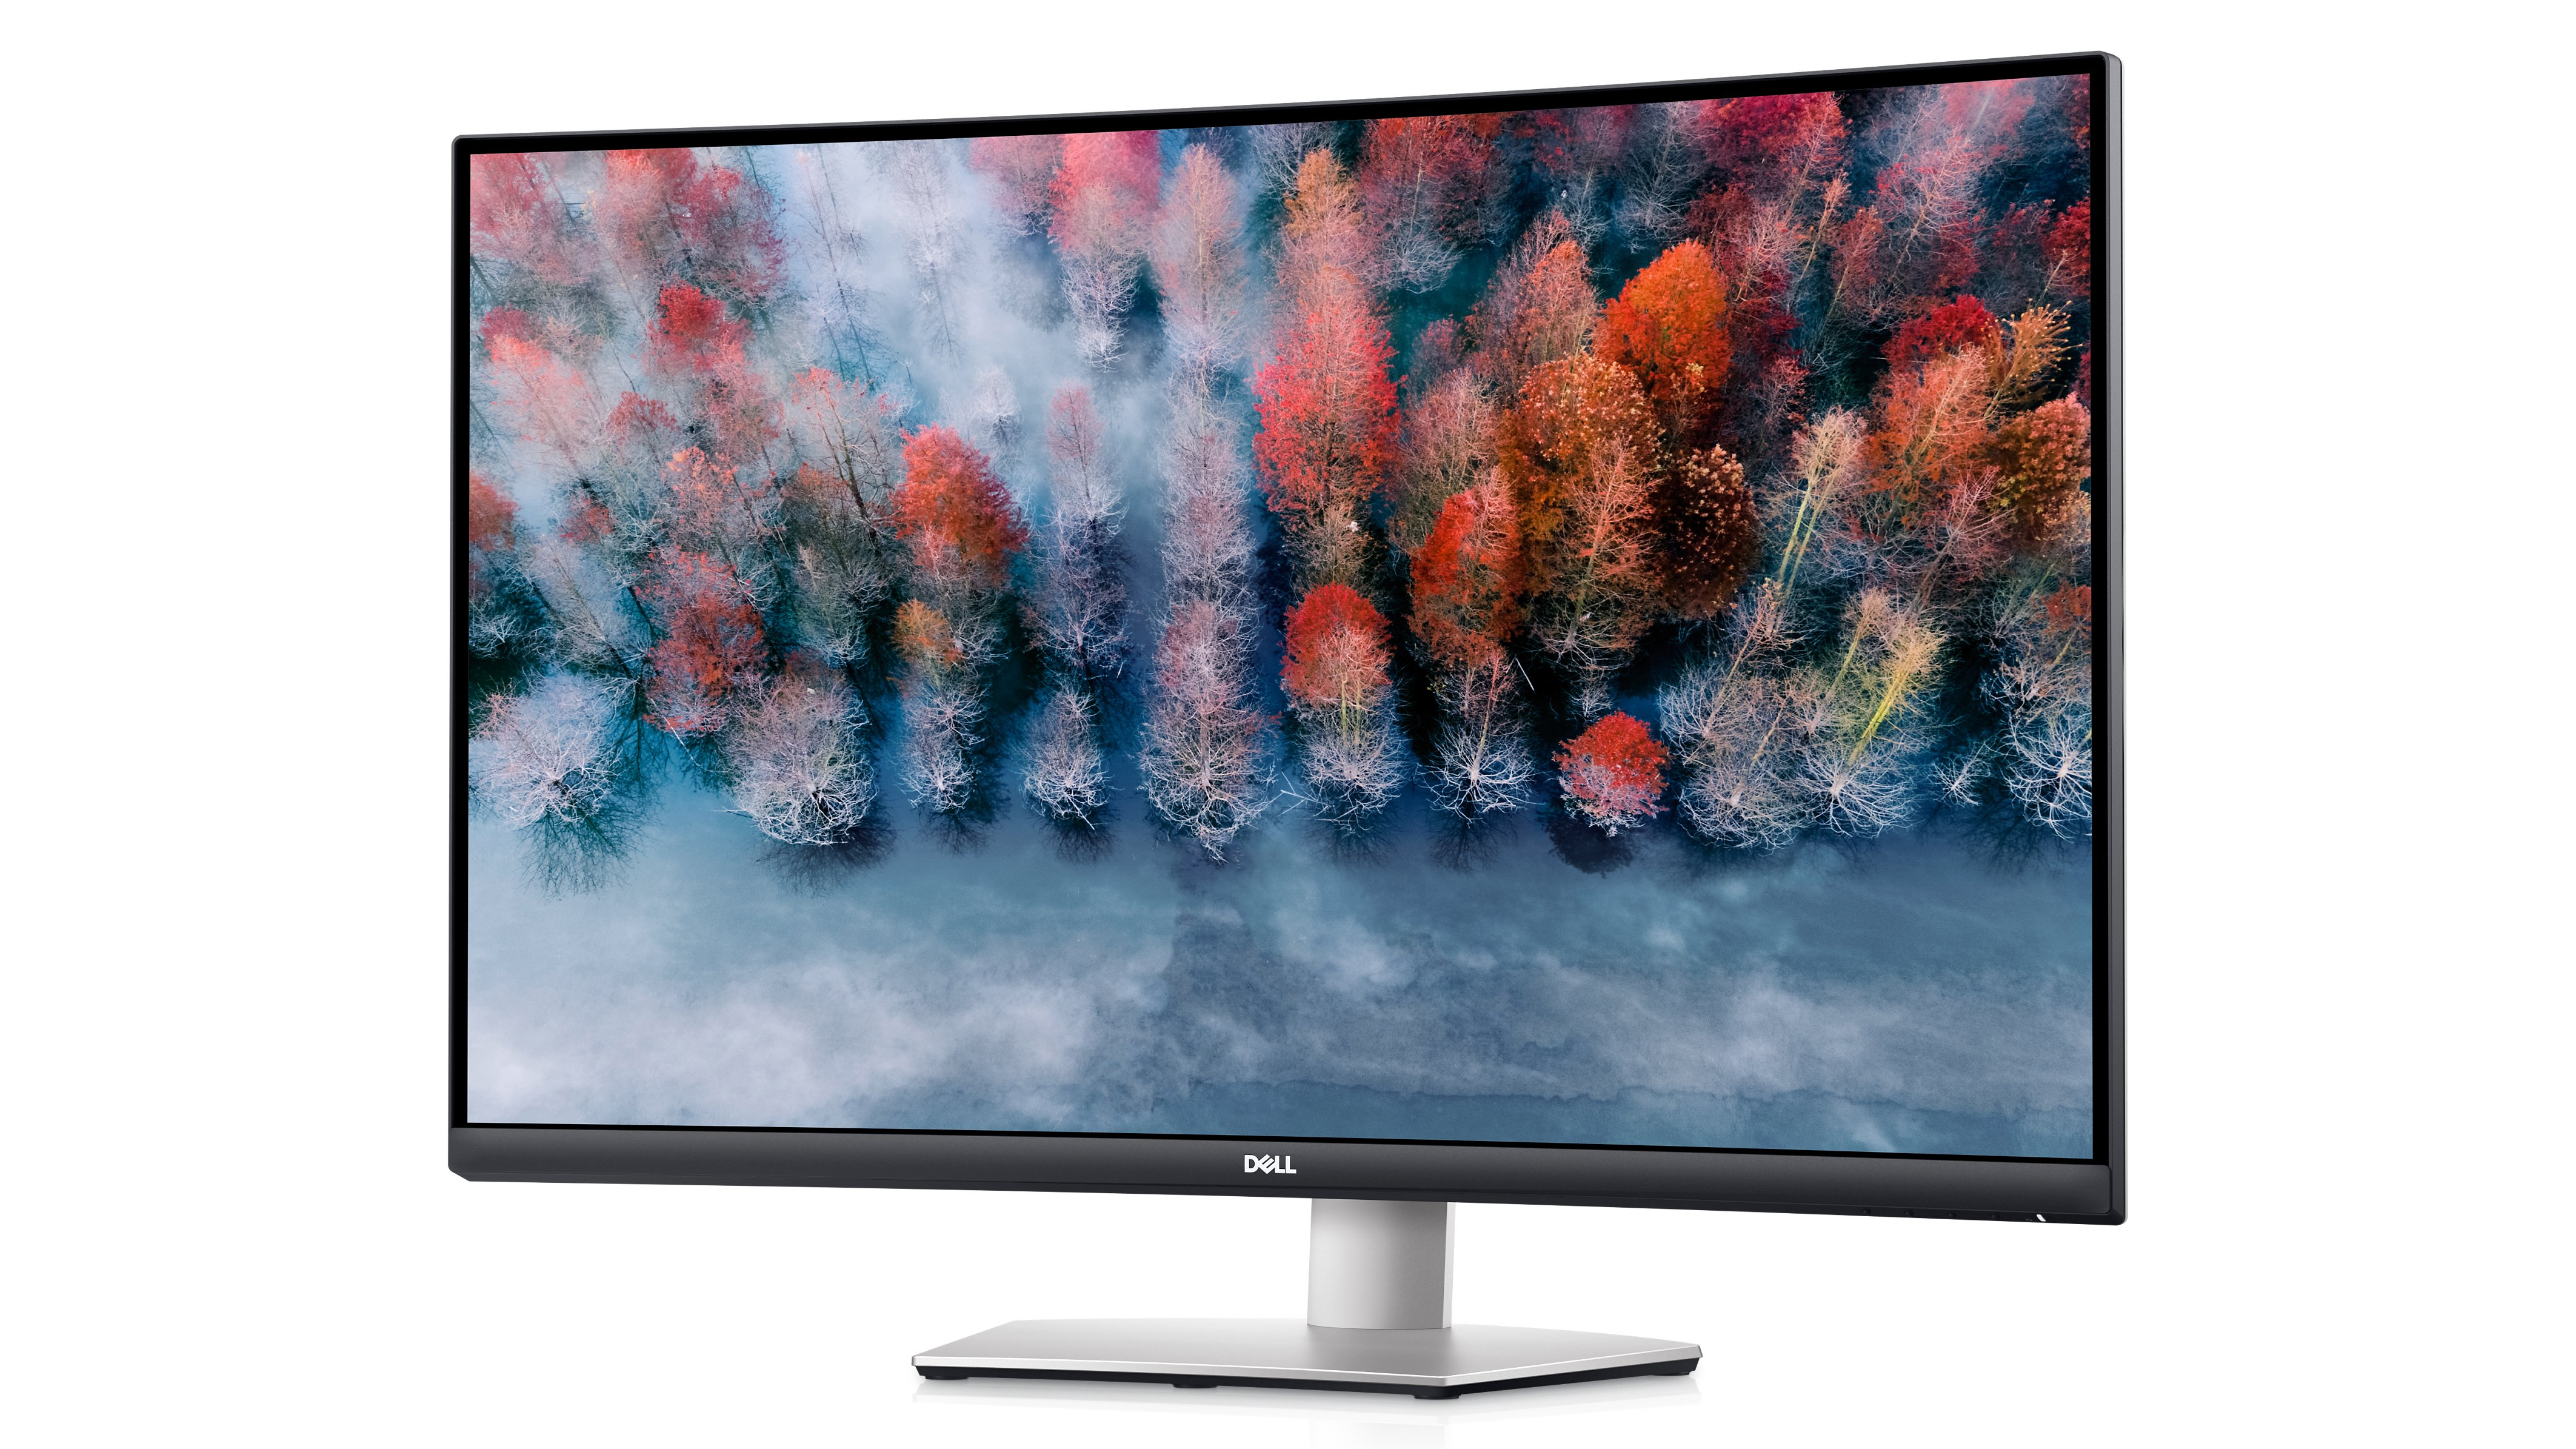 The Dell 4K S3221QS Curved Monitor is gorgeous and excellent for both gaming and work.